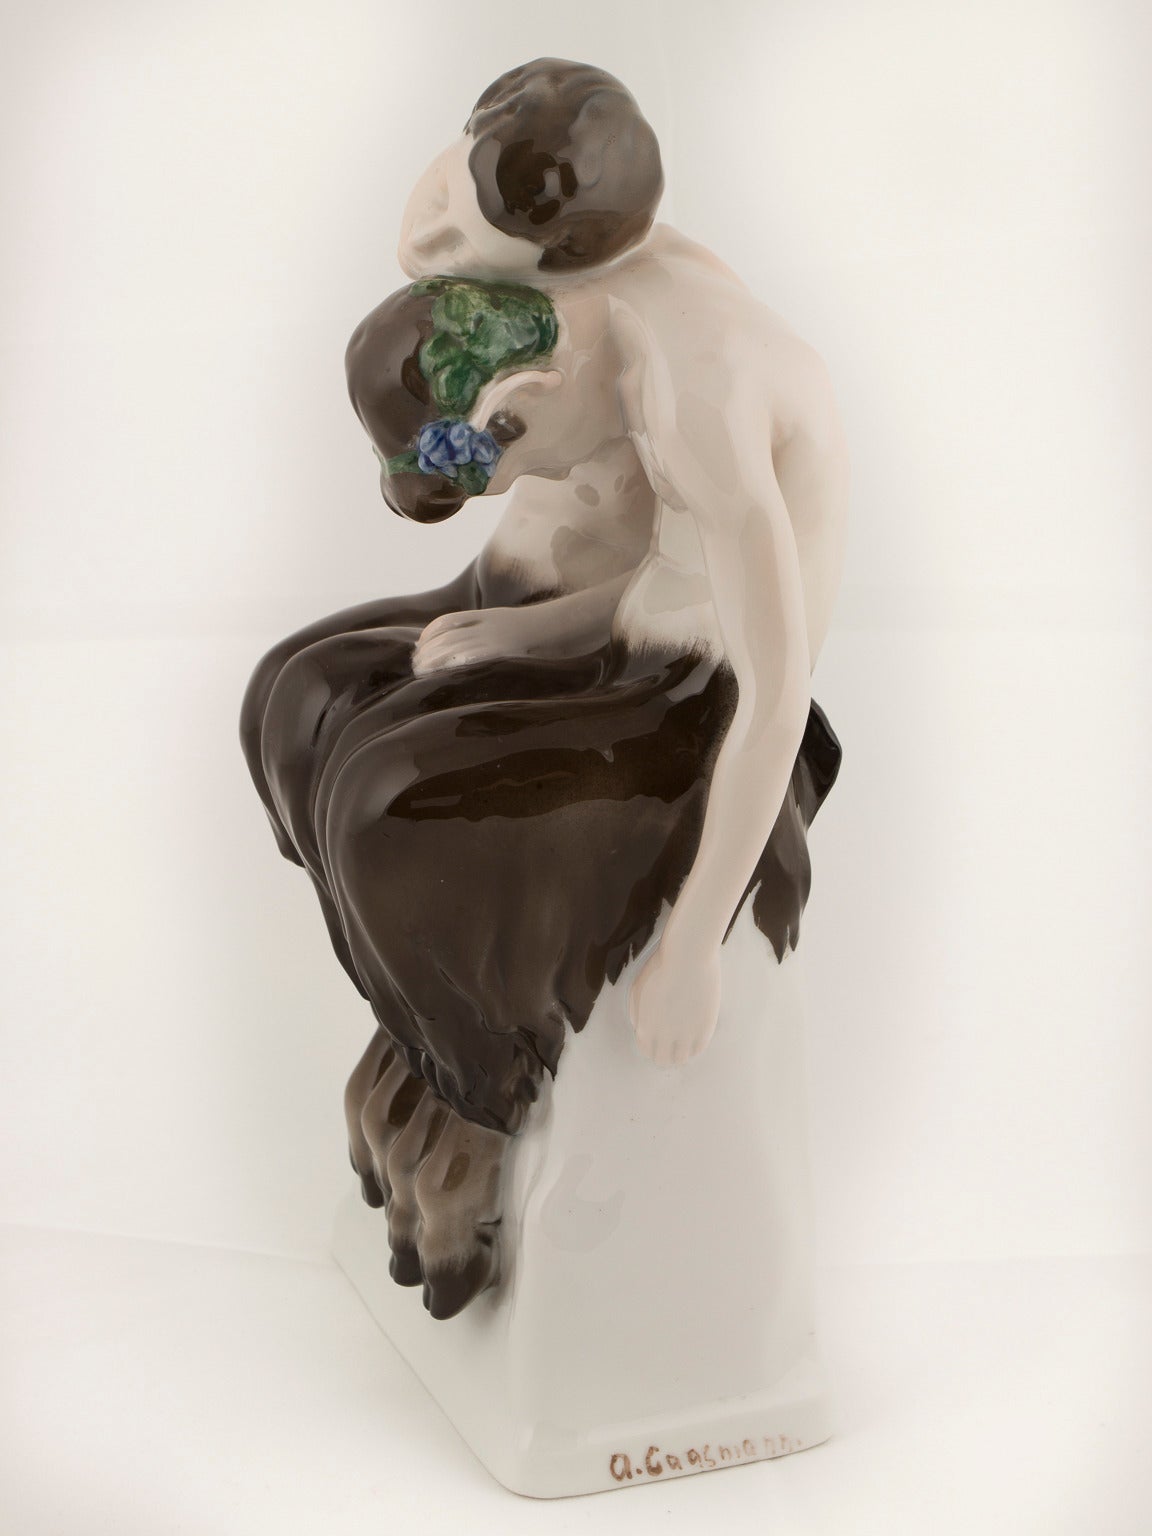 A pair of rosenthal seated fauns, circa 1930
Signed by the artist, A. Glassman to the right-hand side of the pair and bearing rosenthal mark to the base of the piece.